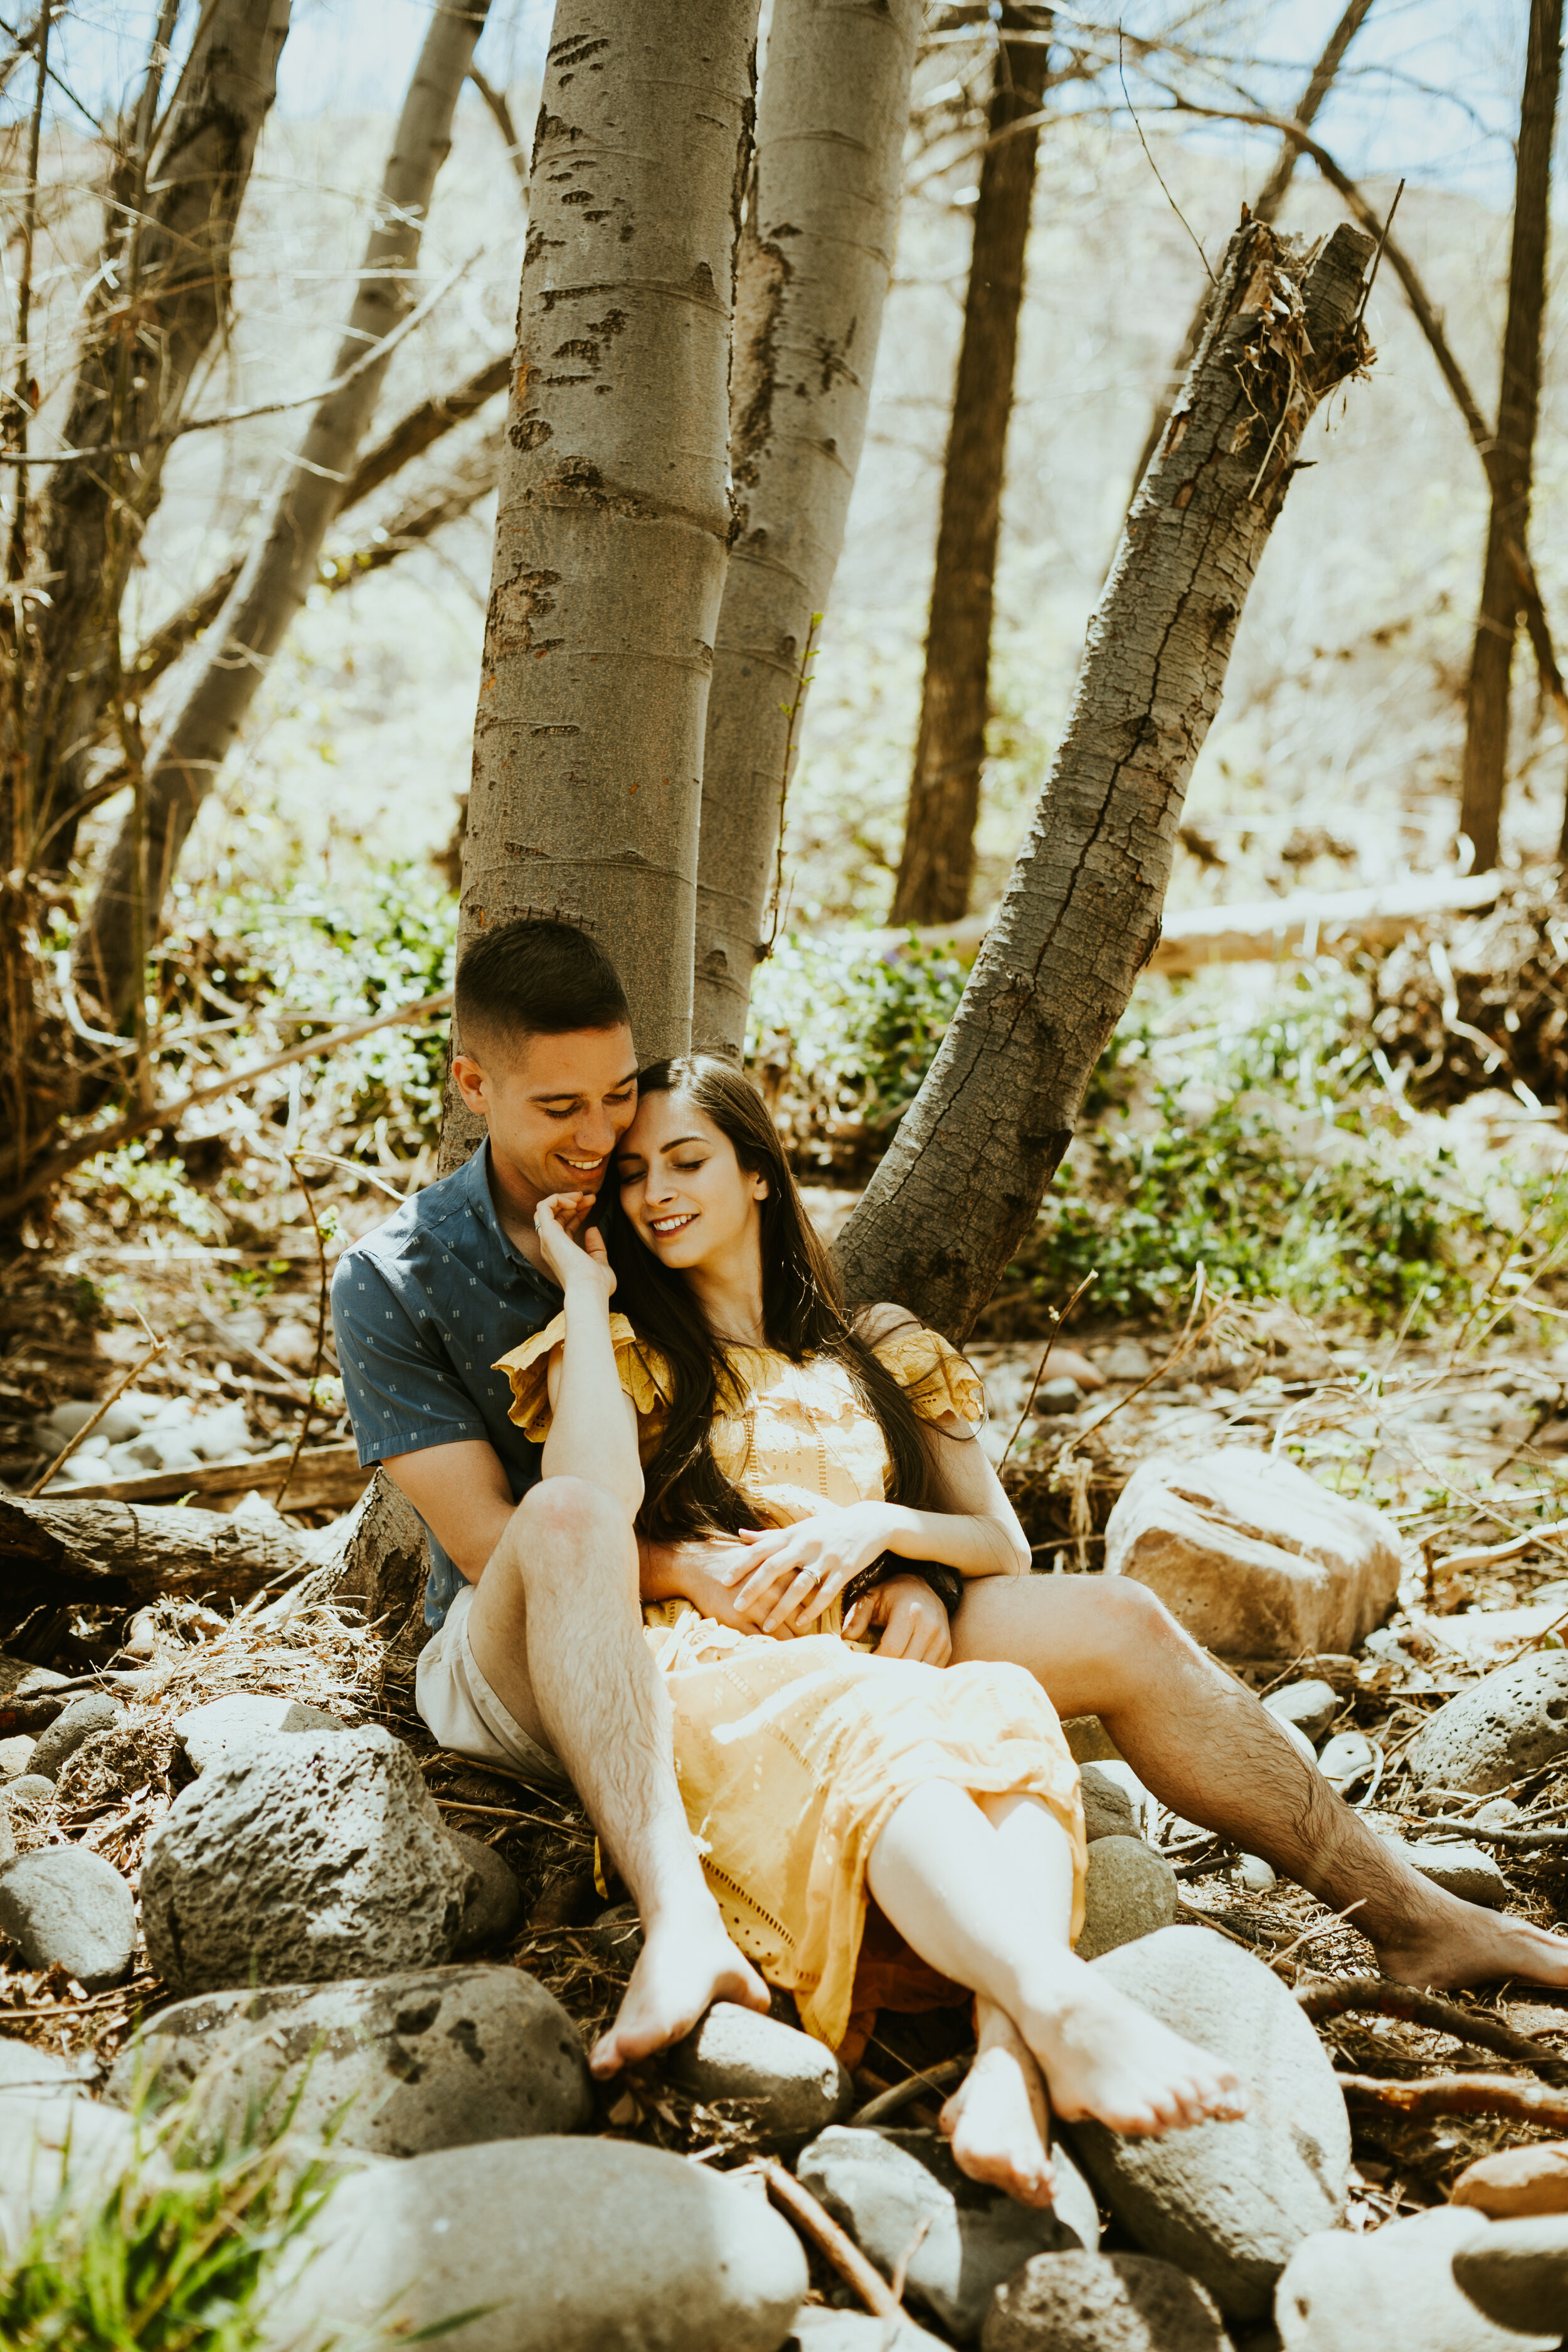 red rock crossing sedona arizona cathedral rock crescent moon ranch couple photos engagement photo outfit inspiration couple posing ideas midday photos anniversary photos-29.jpg